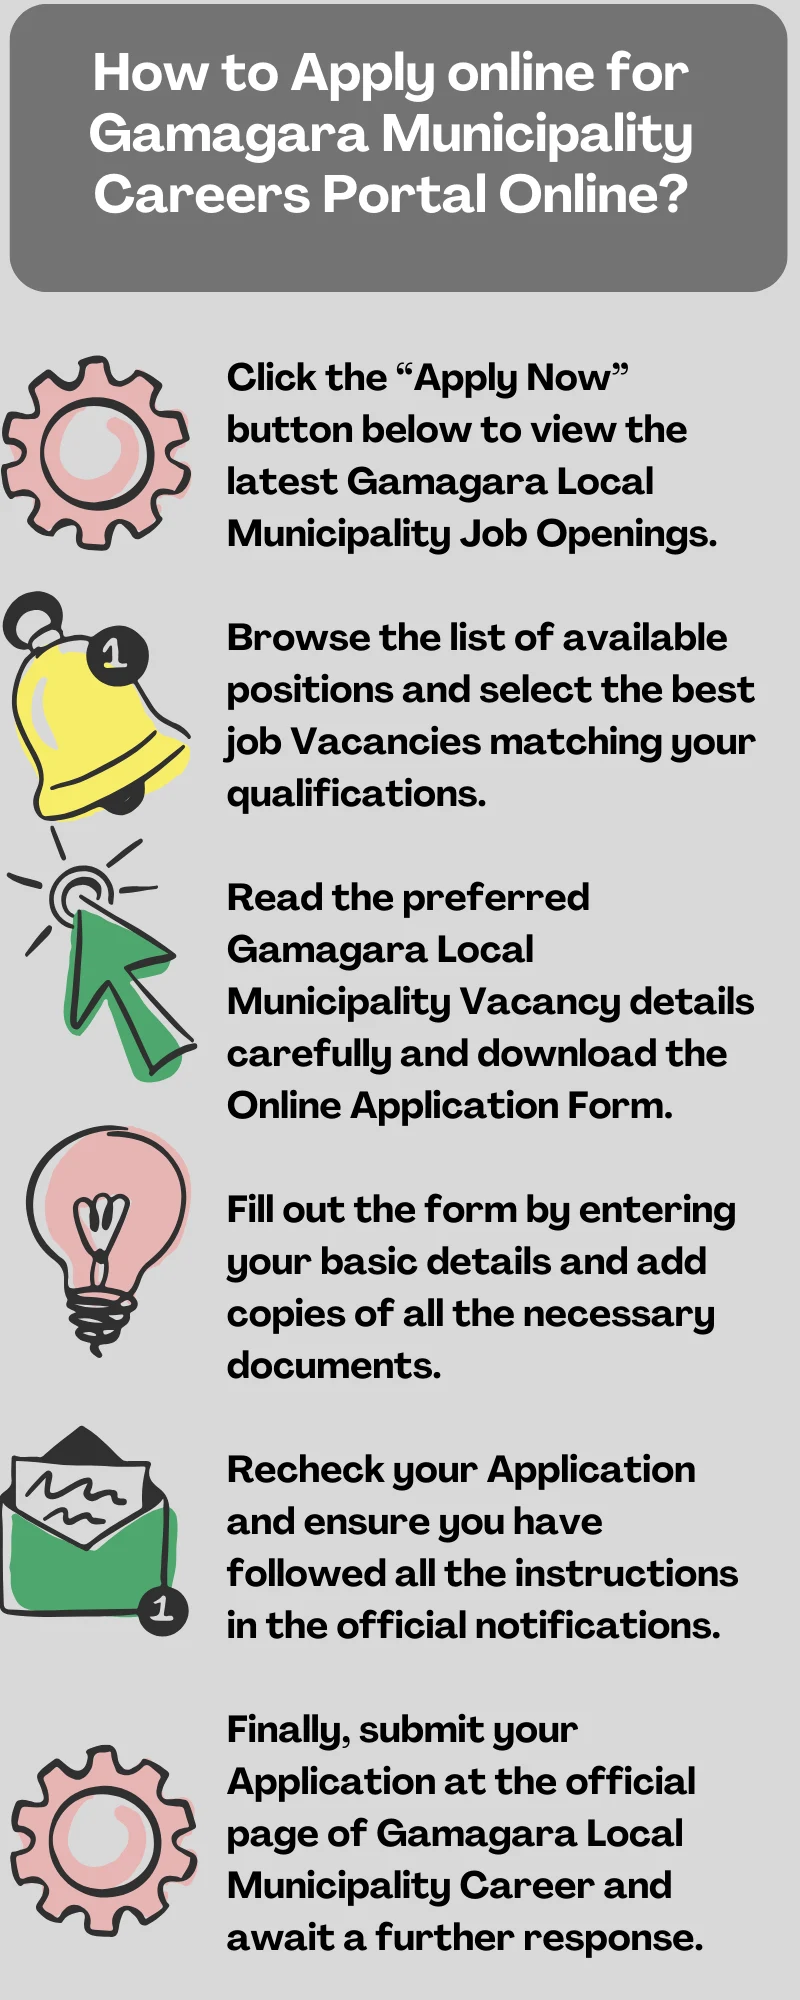 How to Apply online for Gamagara Municipality Careers Portal Online?
